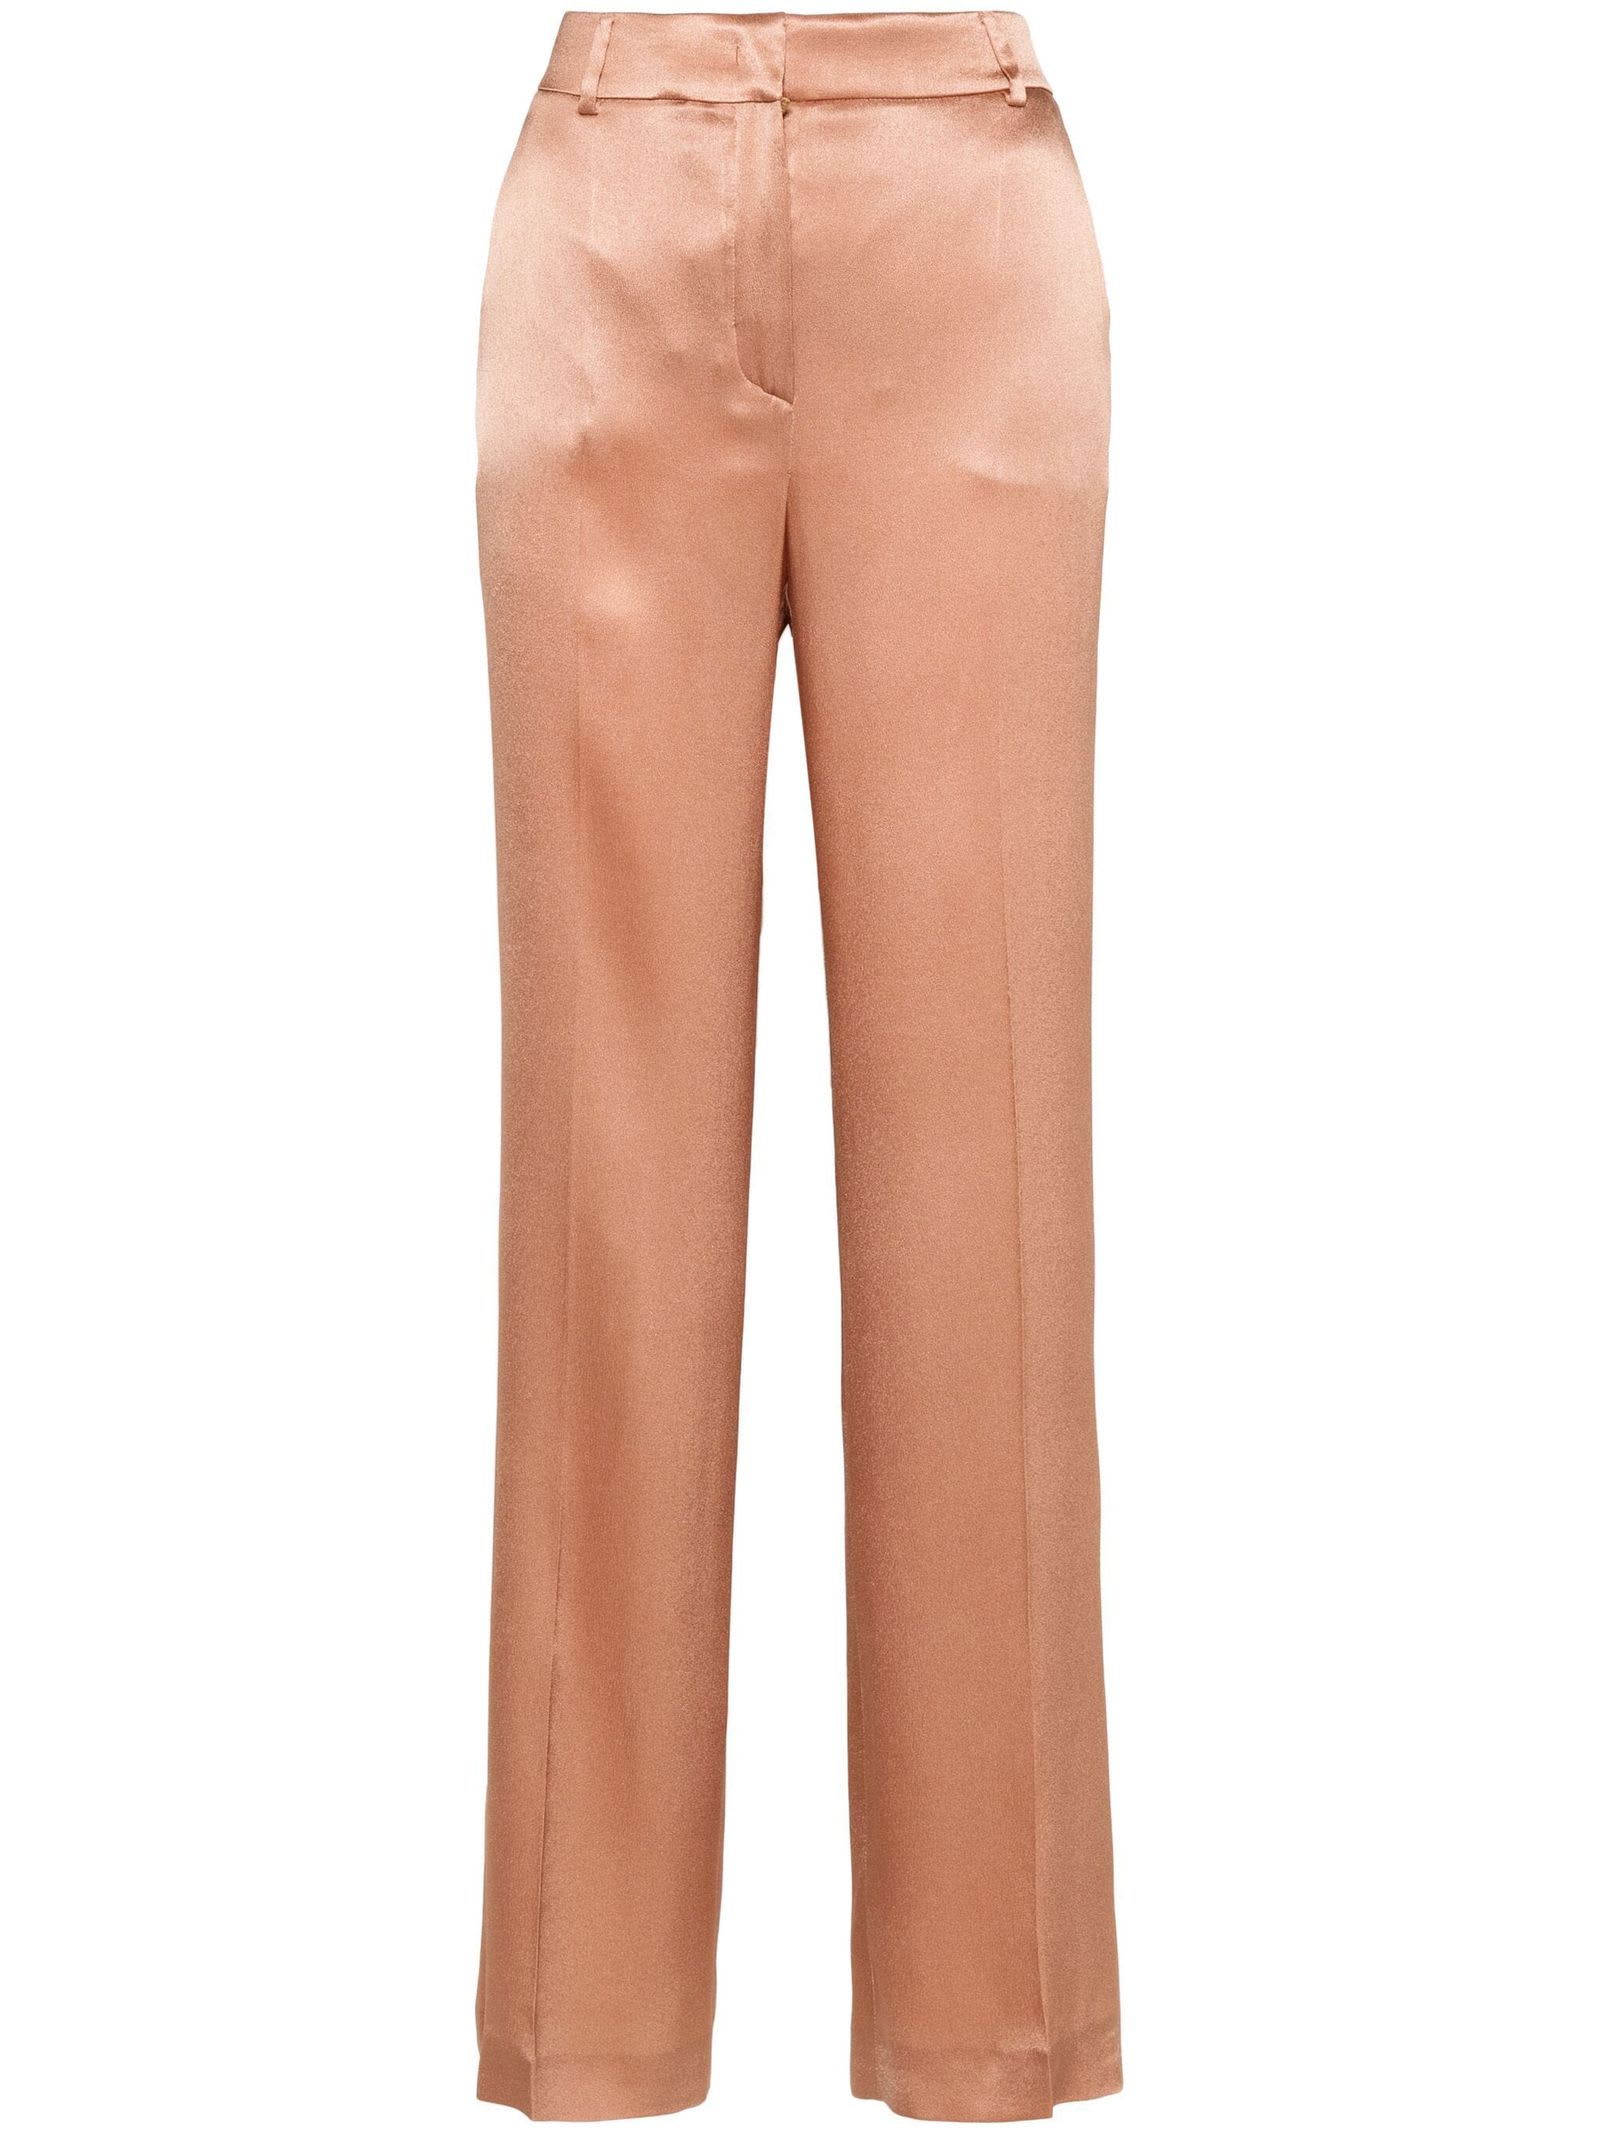 Pink Satin Weave Trousers